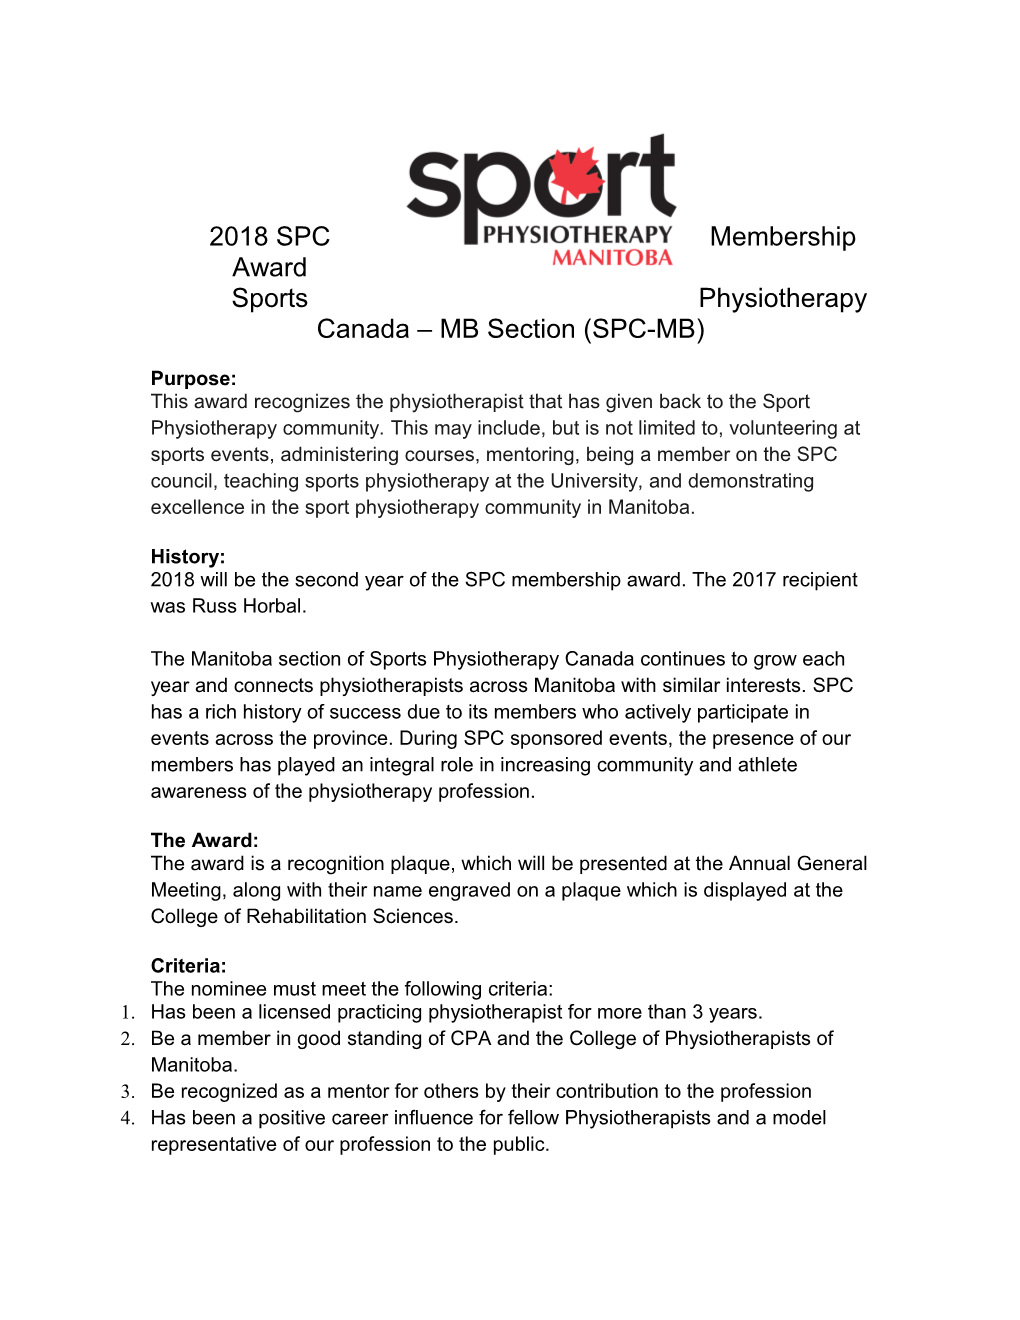 Sports Physiotherapy Canada MB Section (SPC-MB)